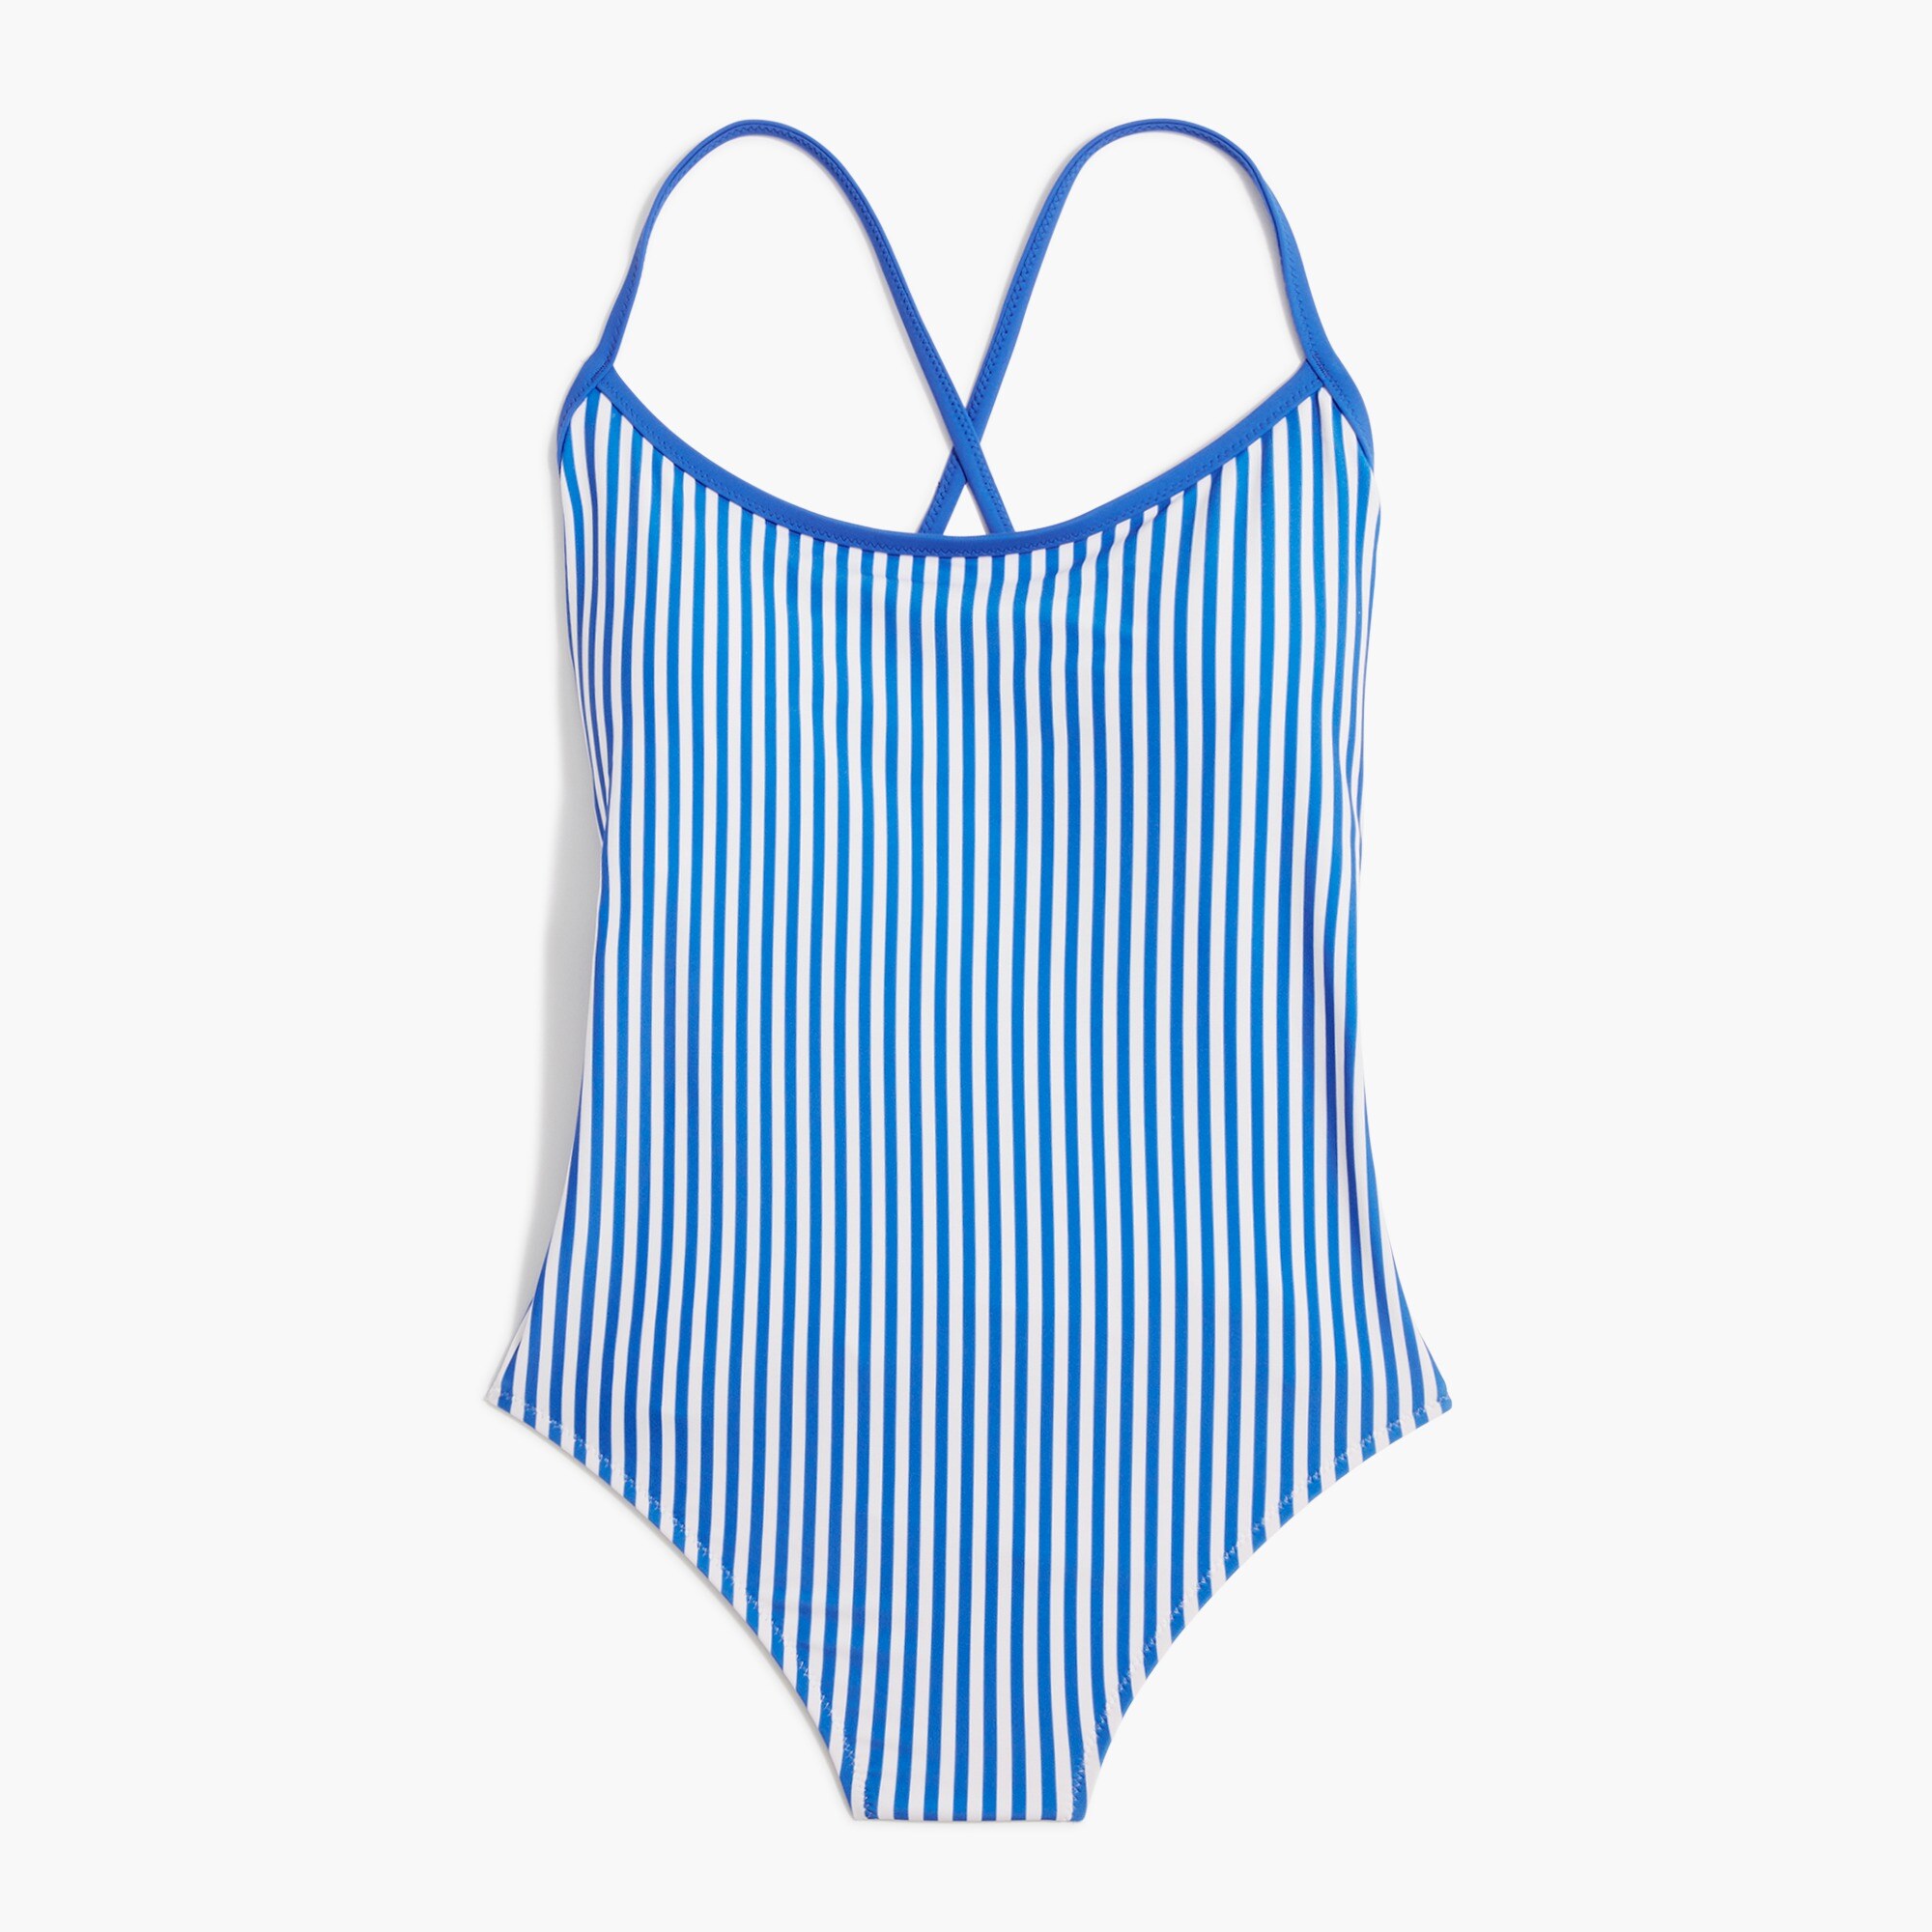  Striped one-piece swimsuit with crisscross back